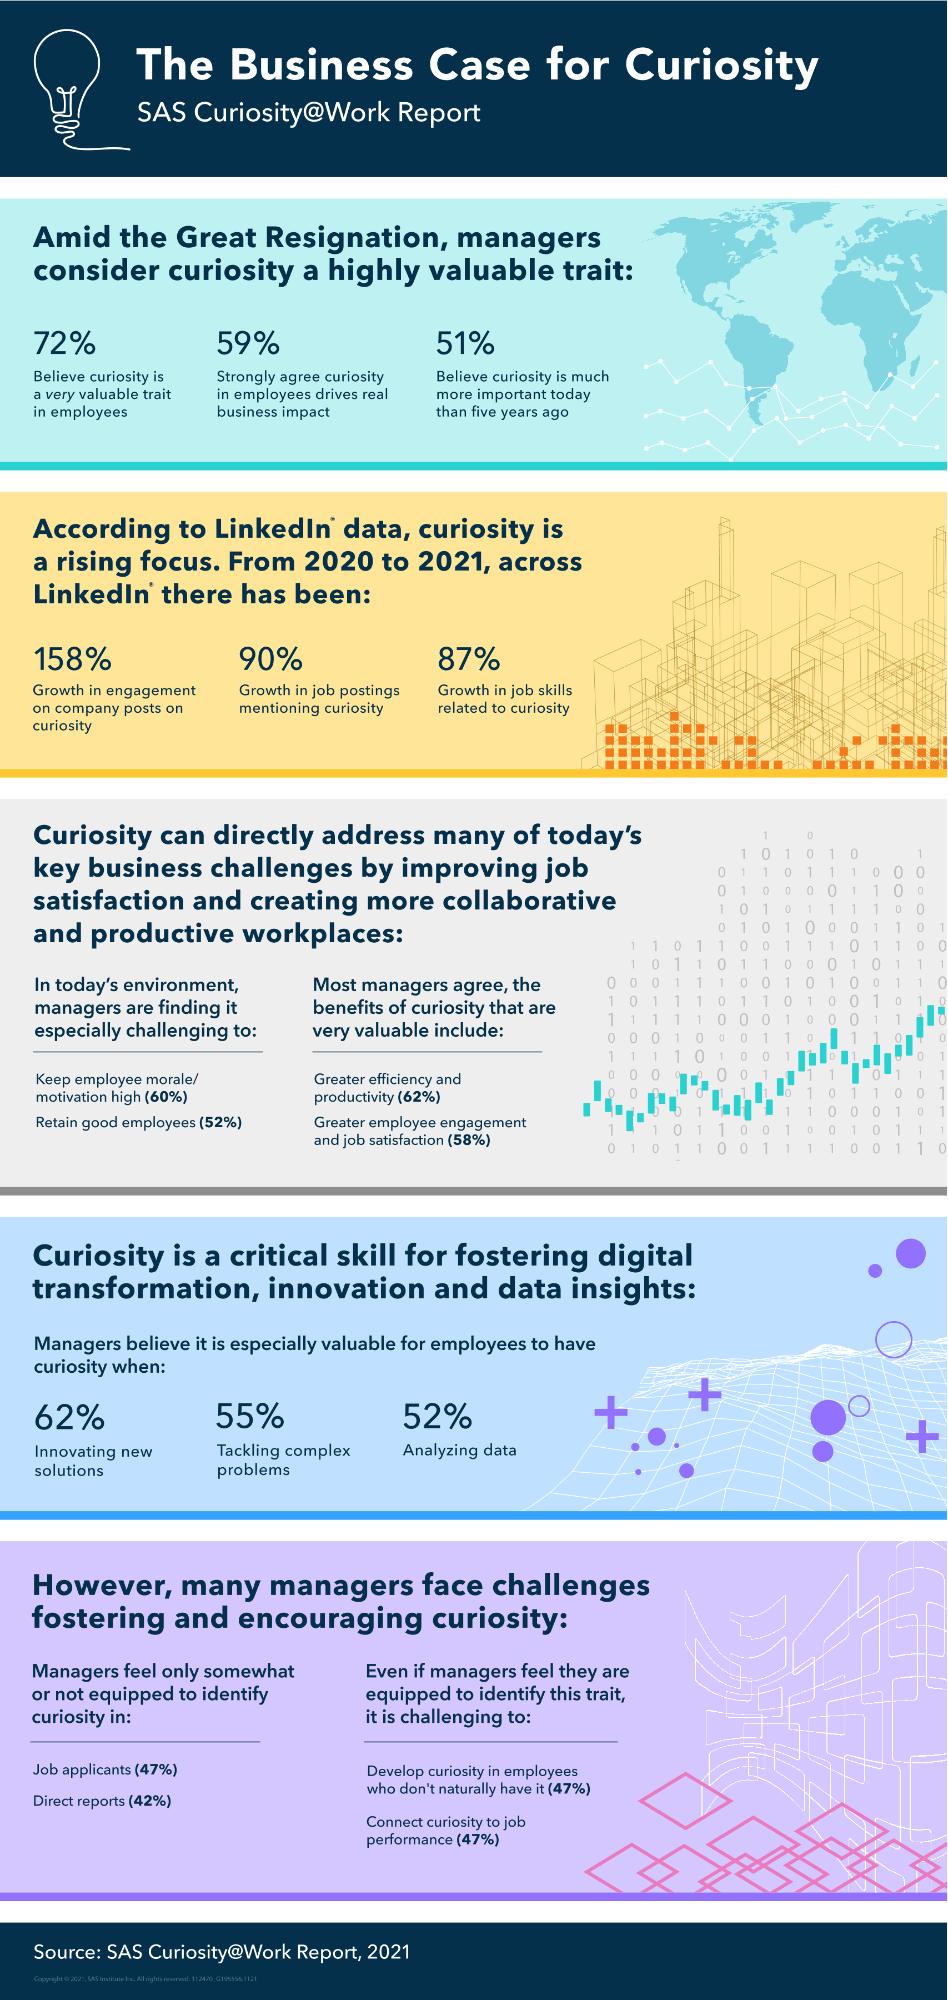 The Business Case for Curiosity infographic